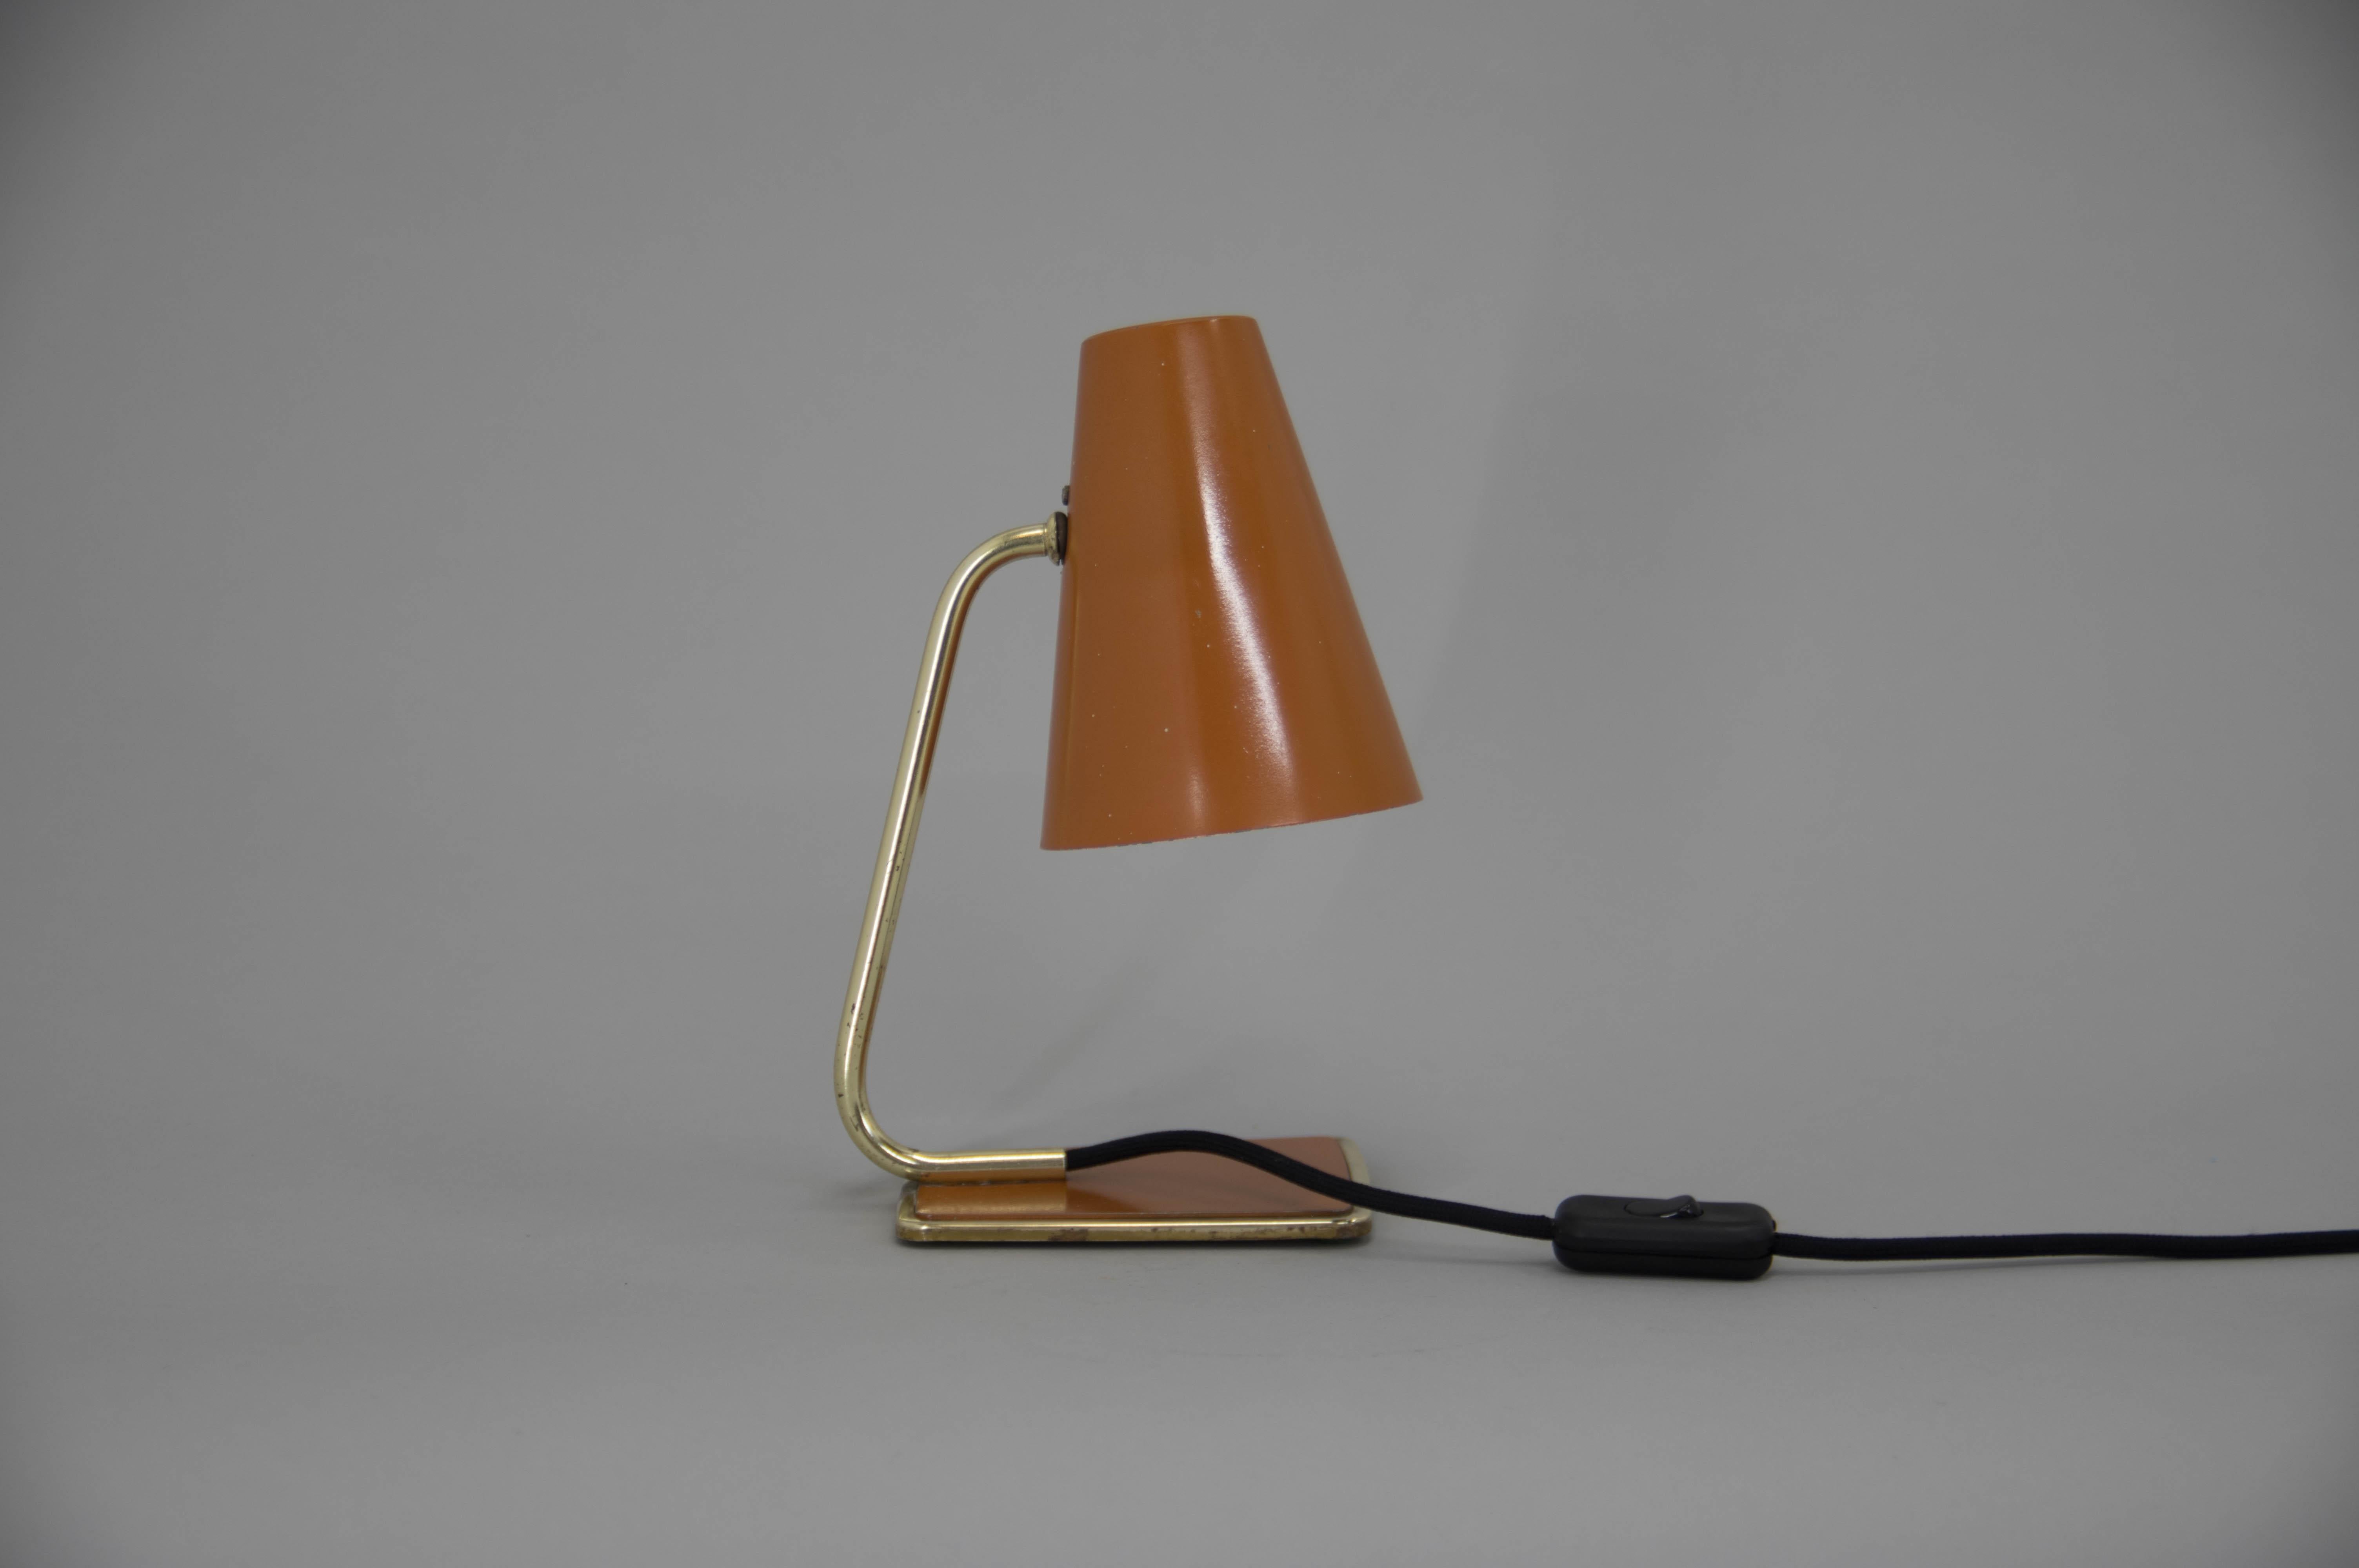 Small table lamp with adjustable shade made of metal.
Rewired: 1x40W, E12-E14 bulb.
US plug adapter included.
 